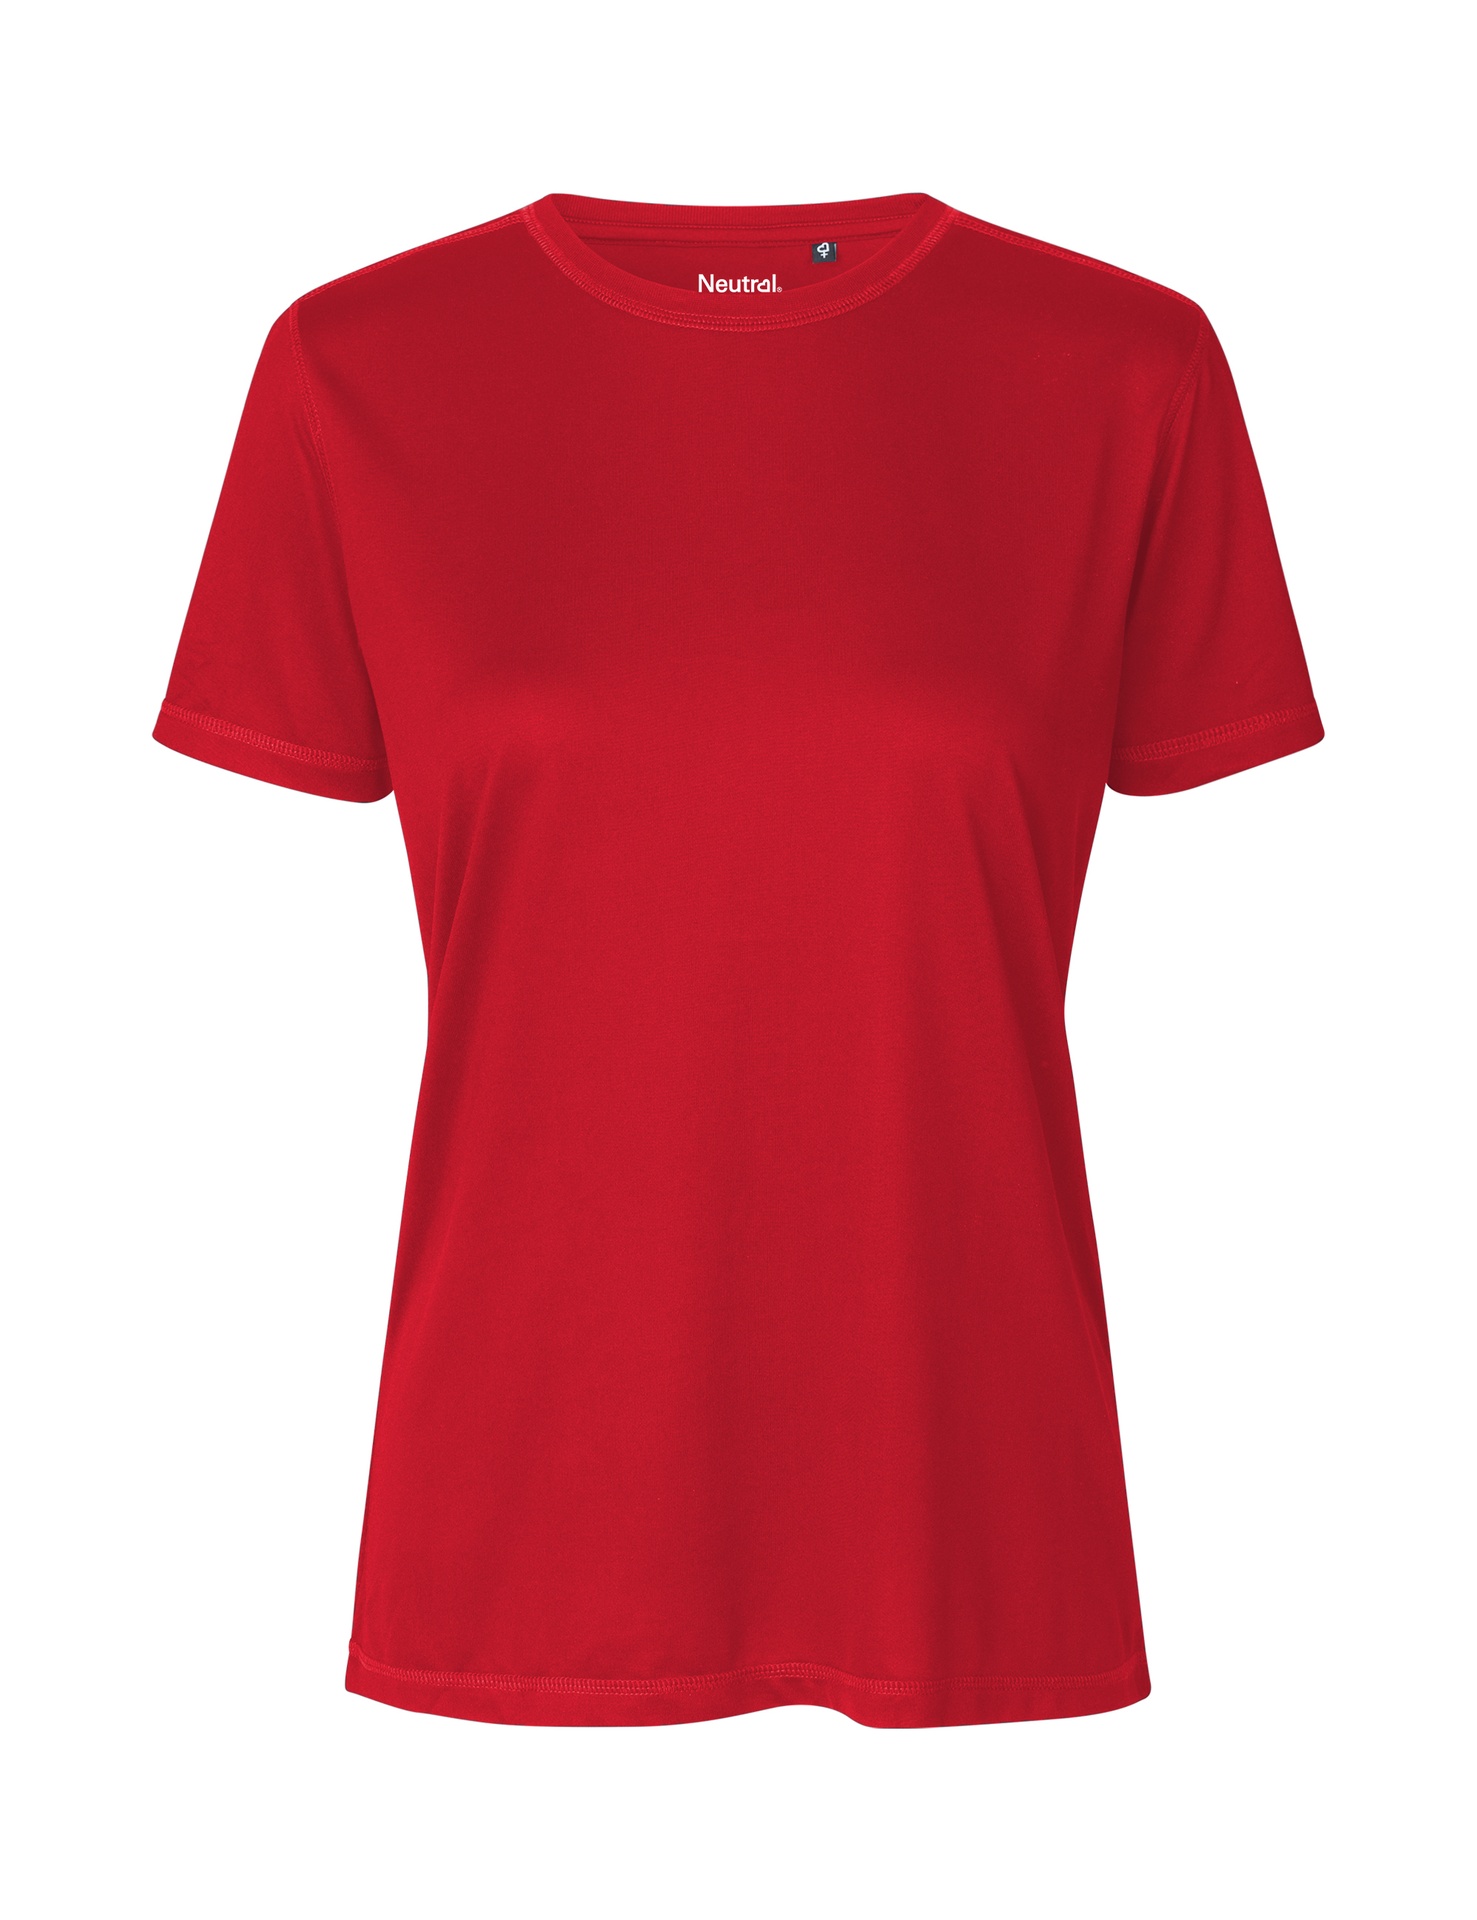 [PR/05210] Ladies Recycled Performance T-Shirt (Red 05, XS)